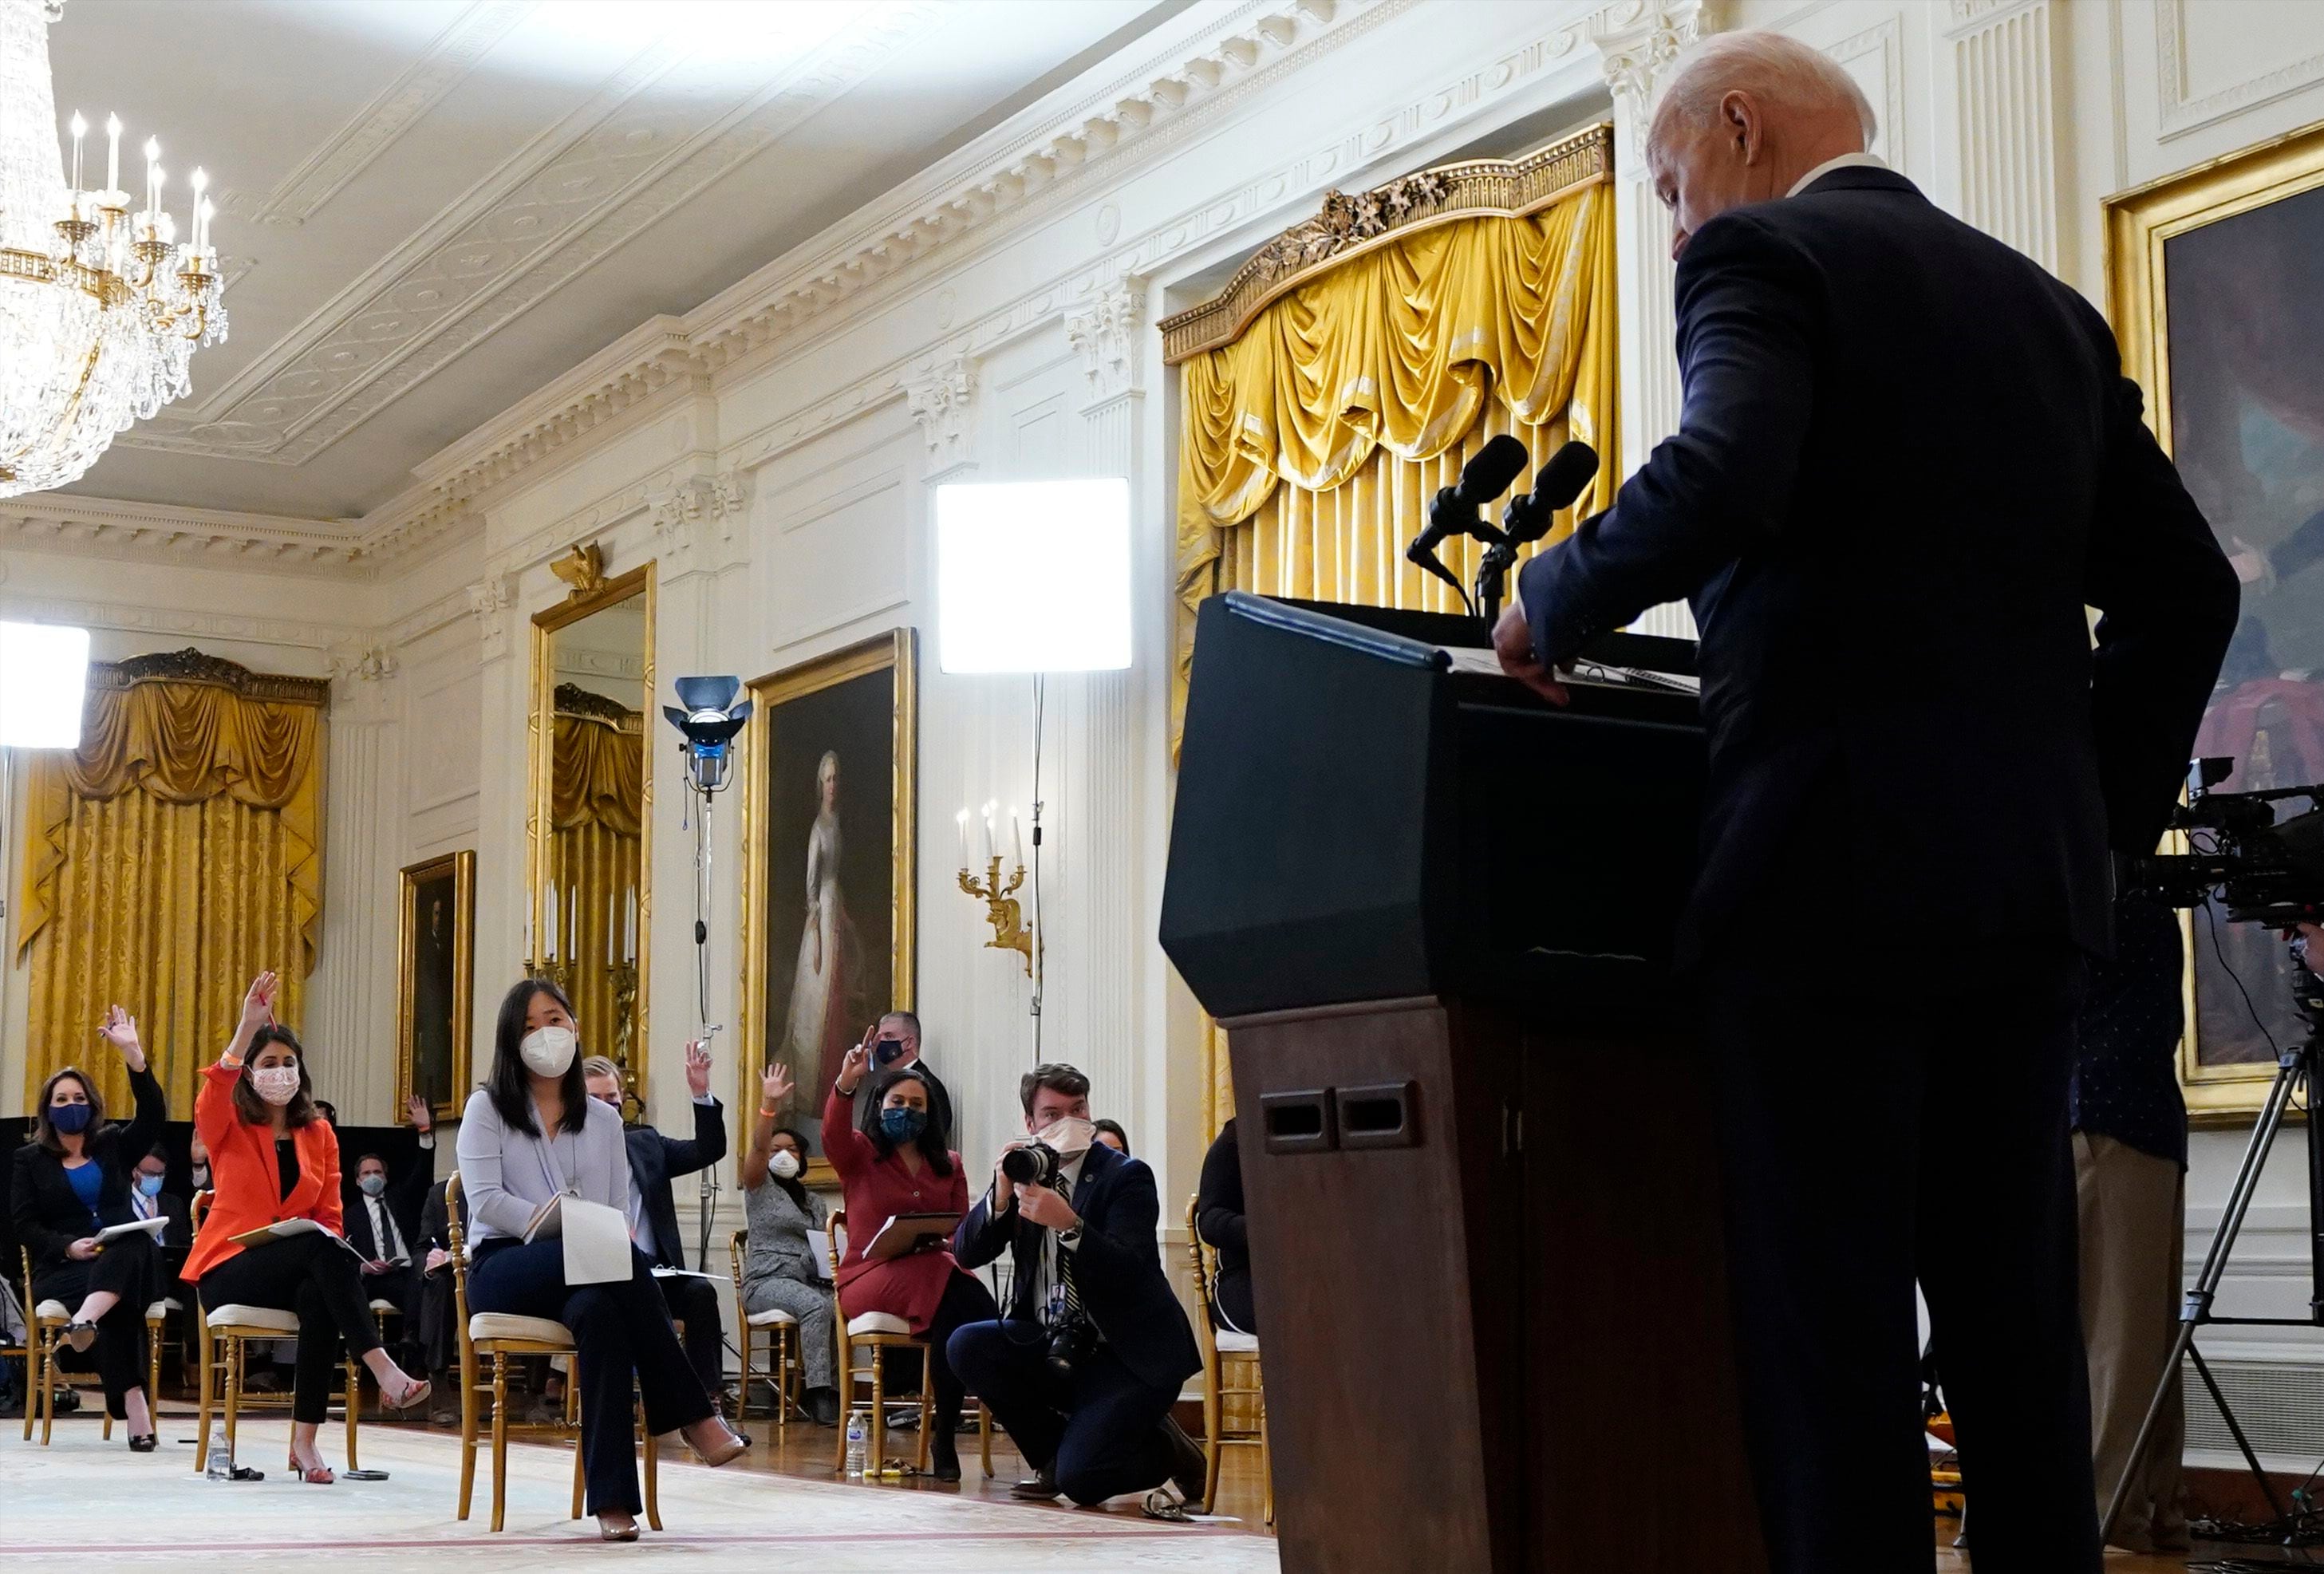 For media, Biden news conference notable for what’s missing